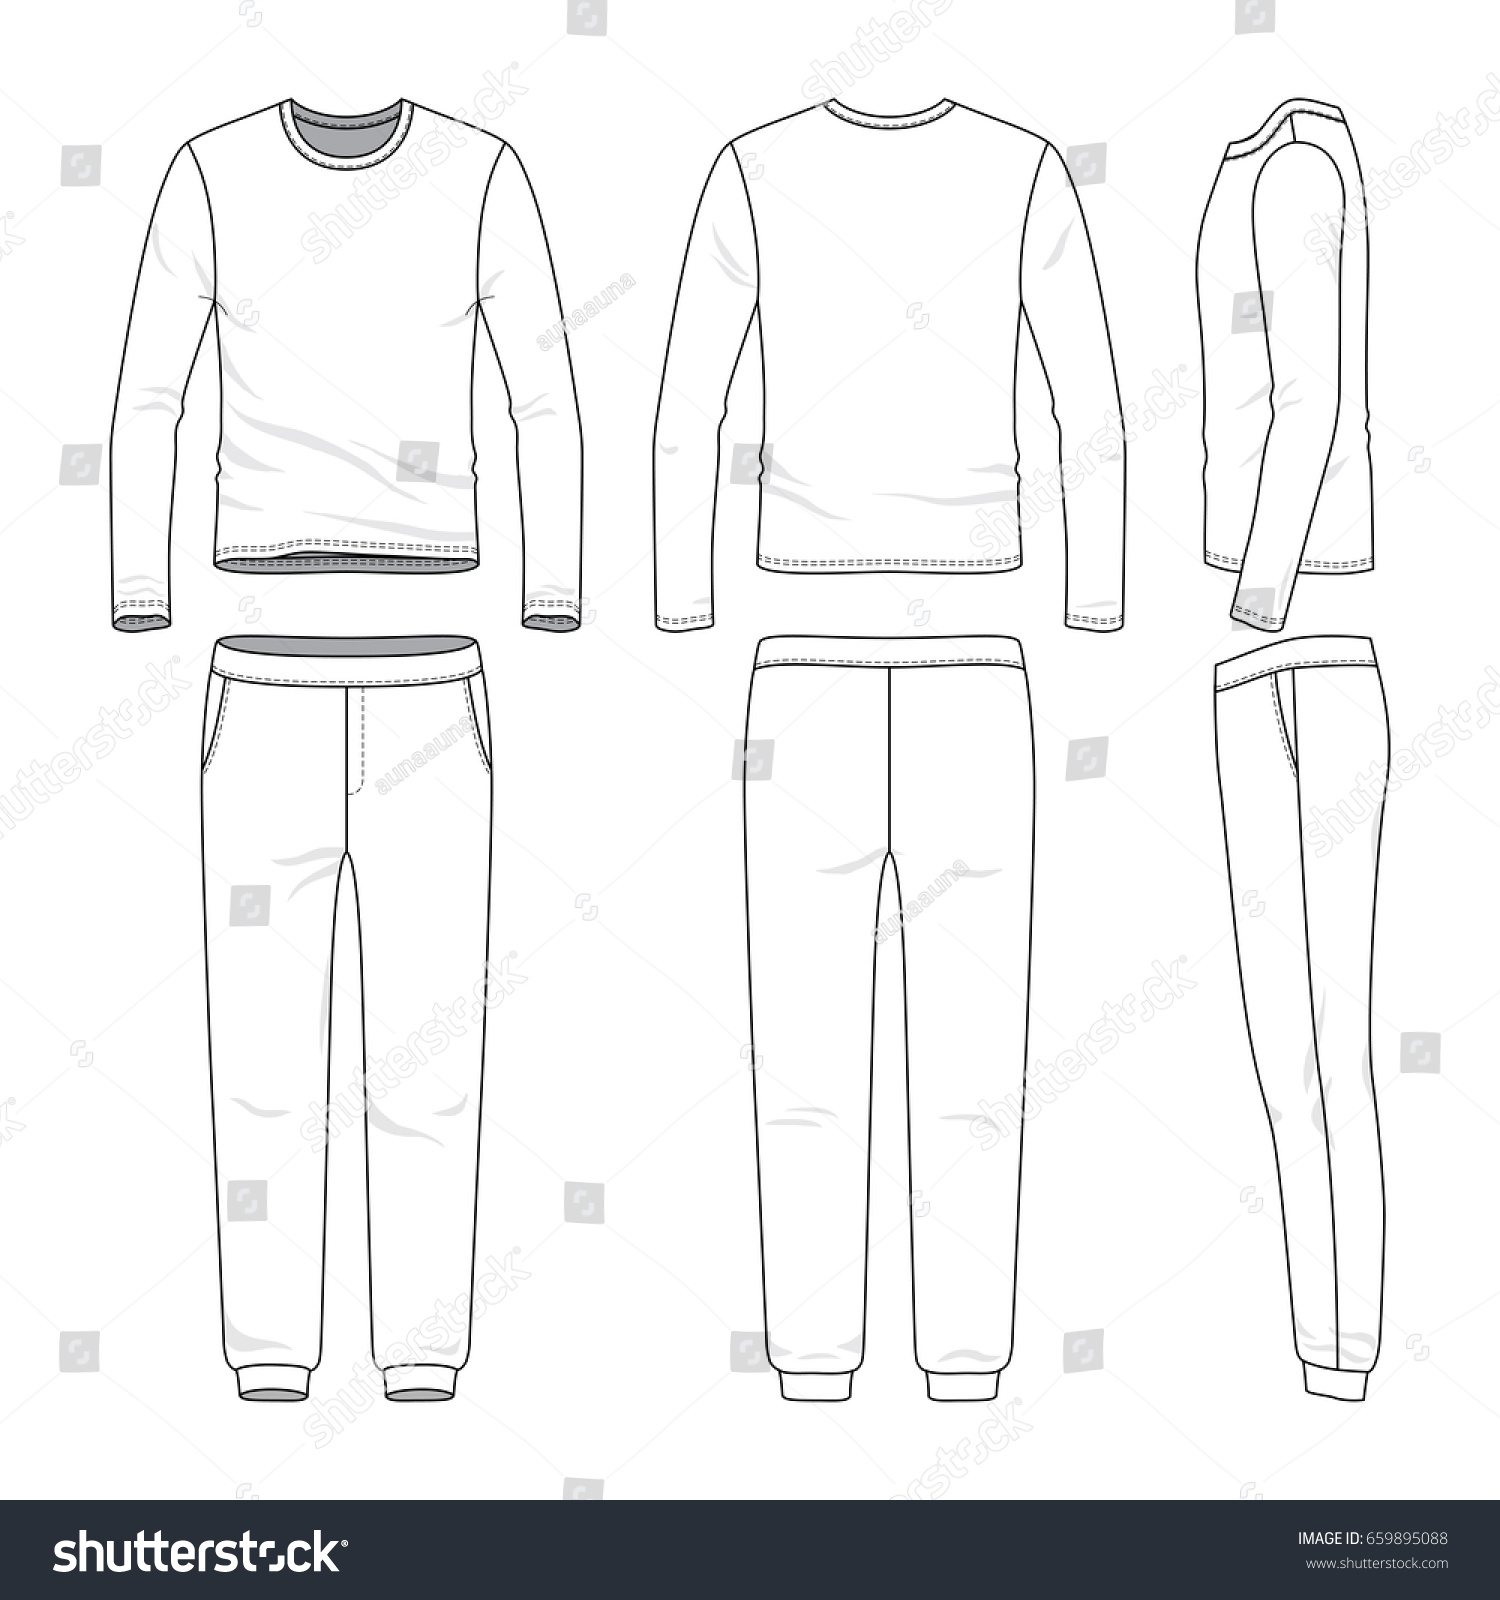 Front Back Side Views Lon Sleeved Stock Vector (Royalty Free) 659895088